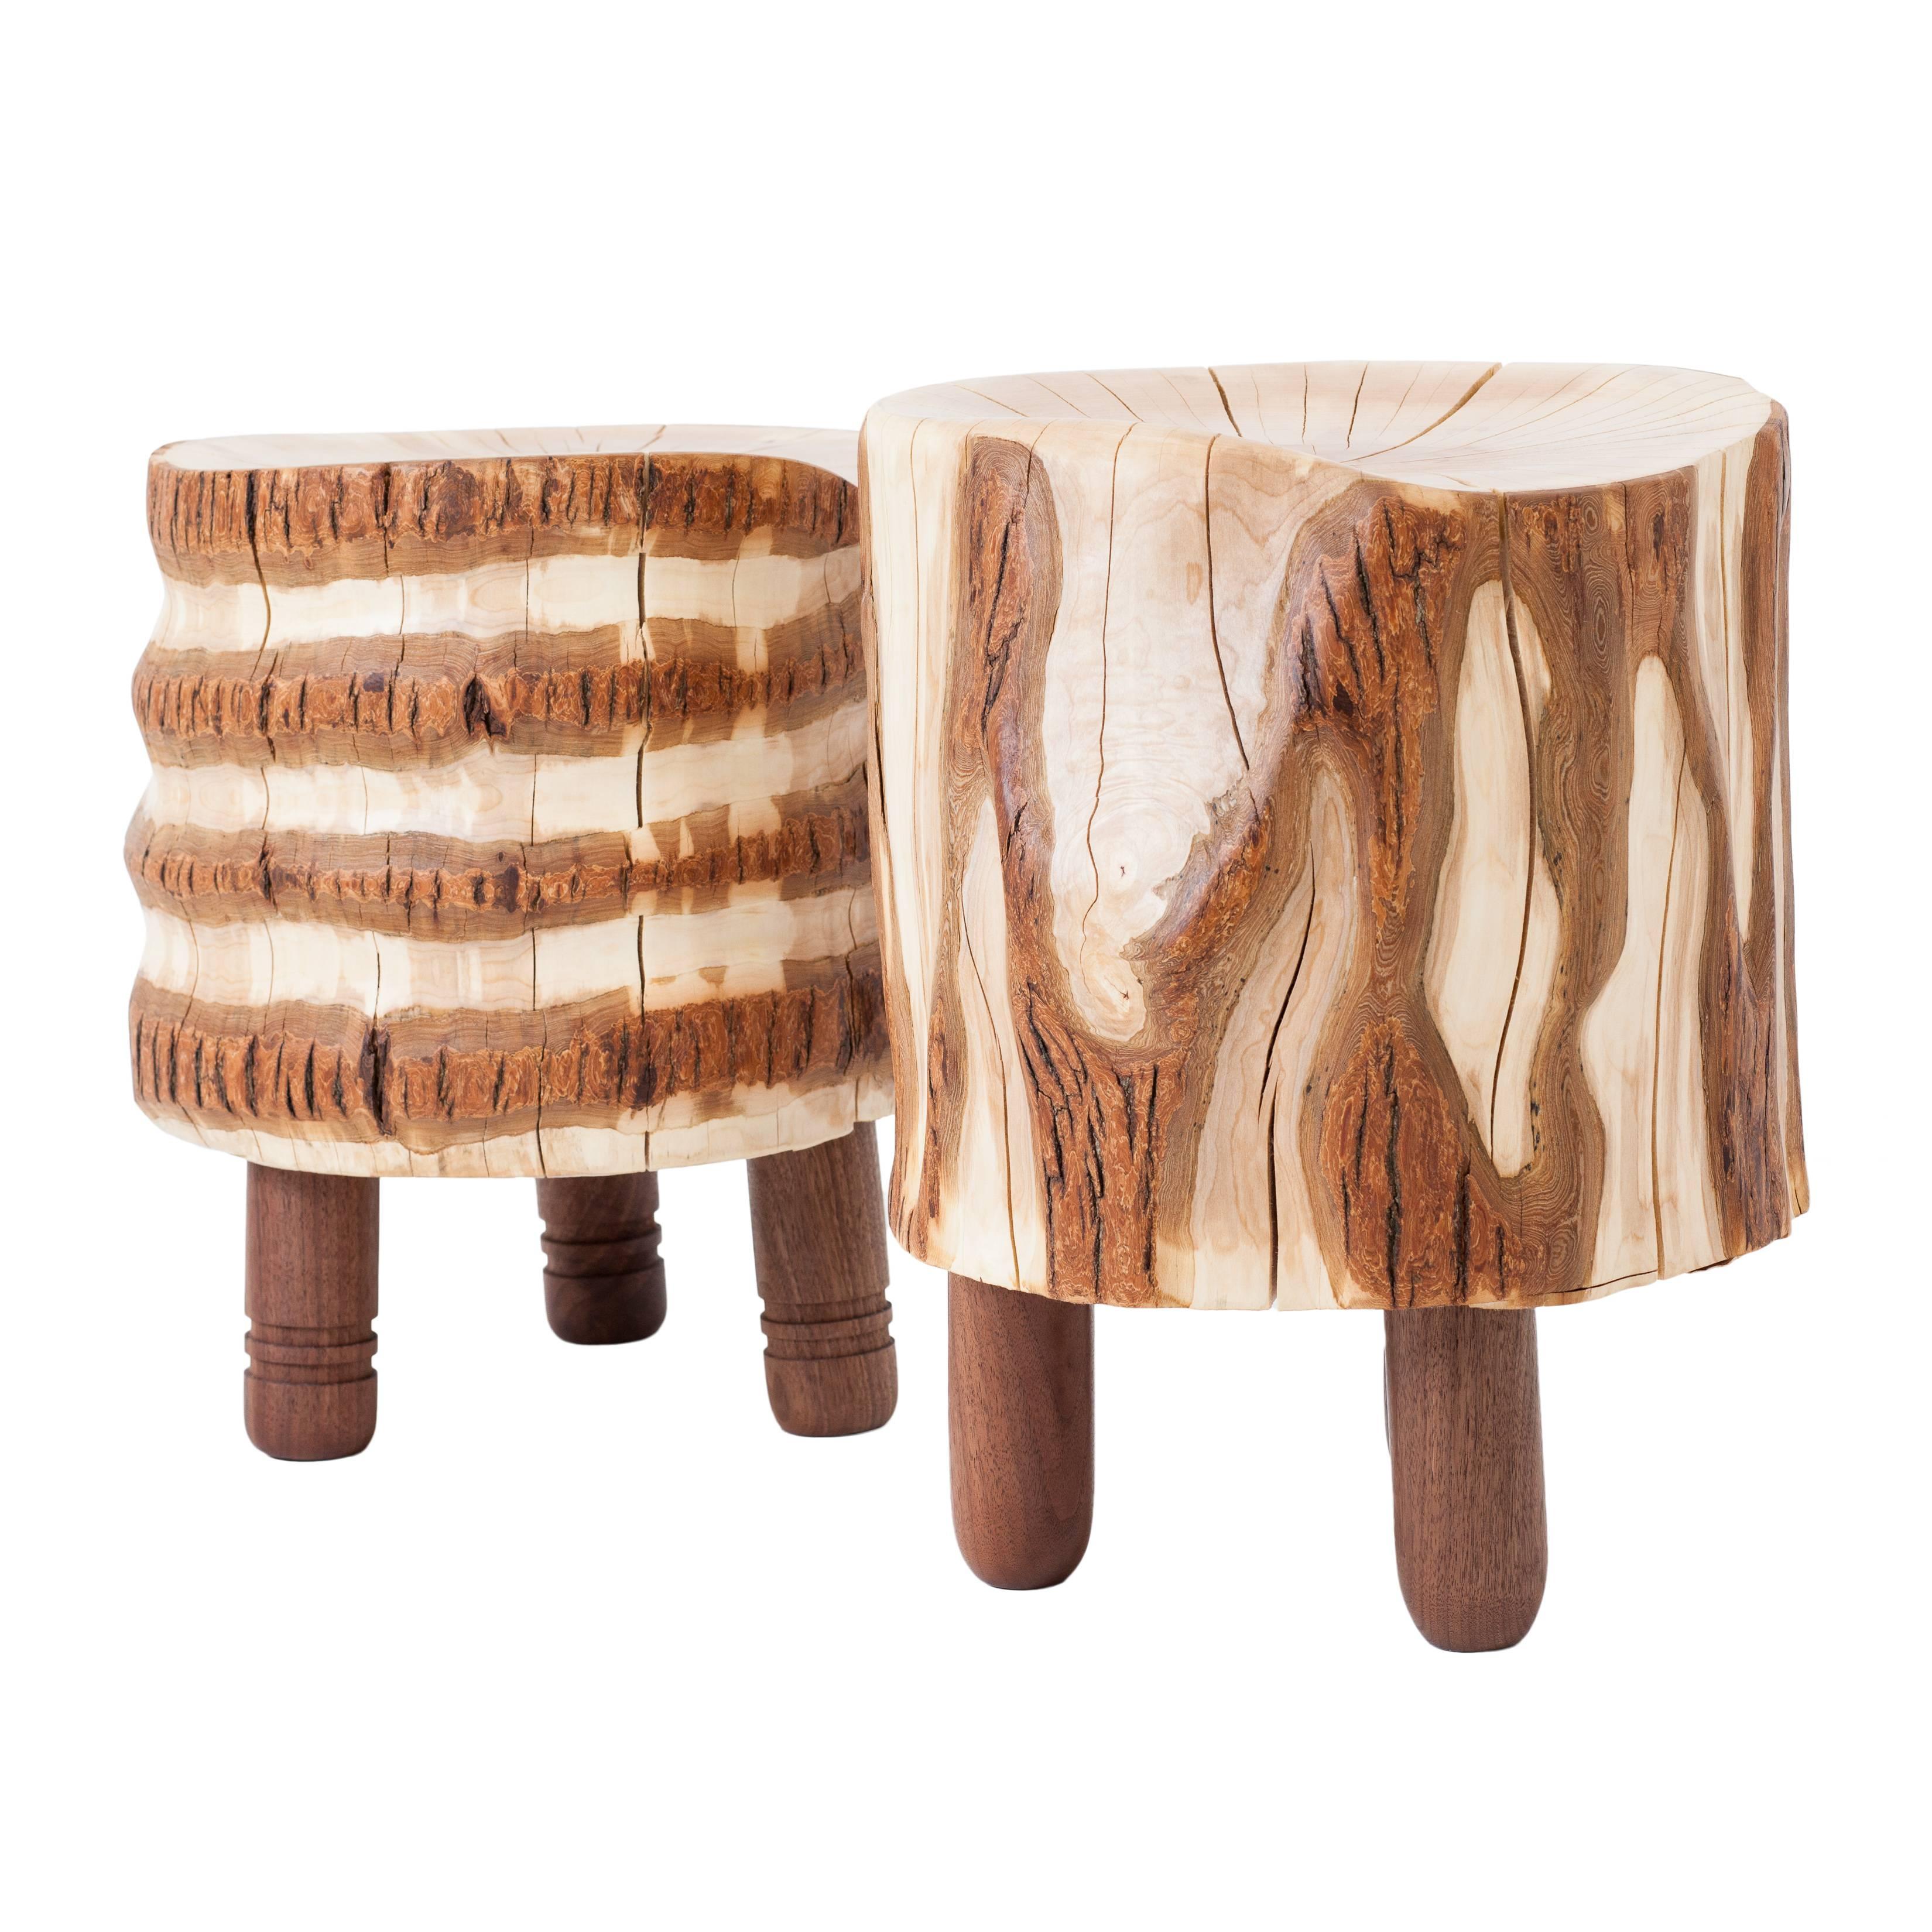 American Reclaimed Salvaged Hurricane Sandy Stump Stools with Hand-Turned Legs & Drawers